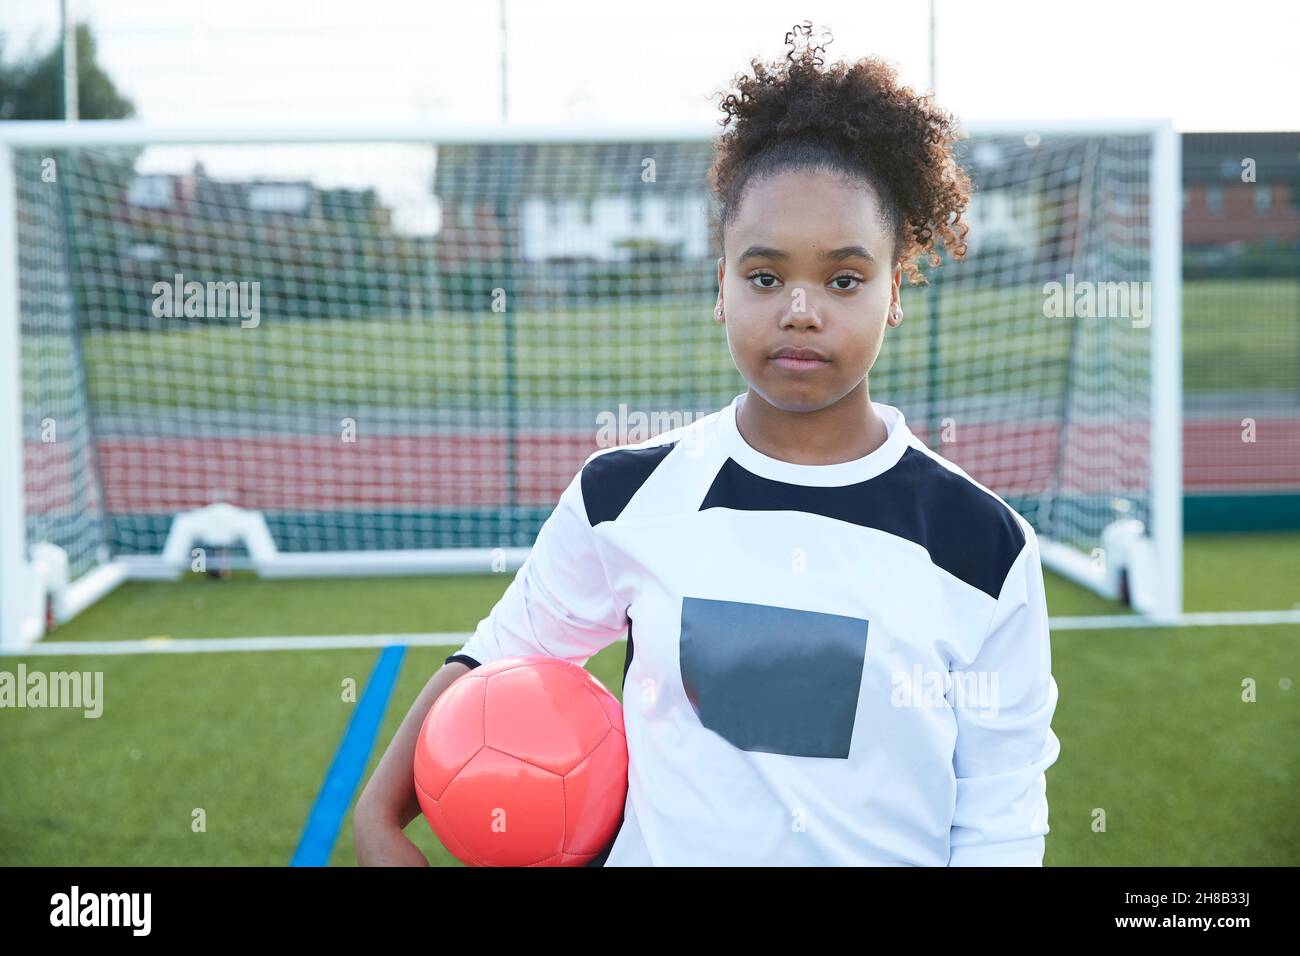 UK, Portrait of female soccer player (12-13) in front of goal Stock Photo